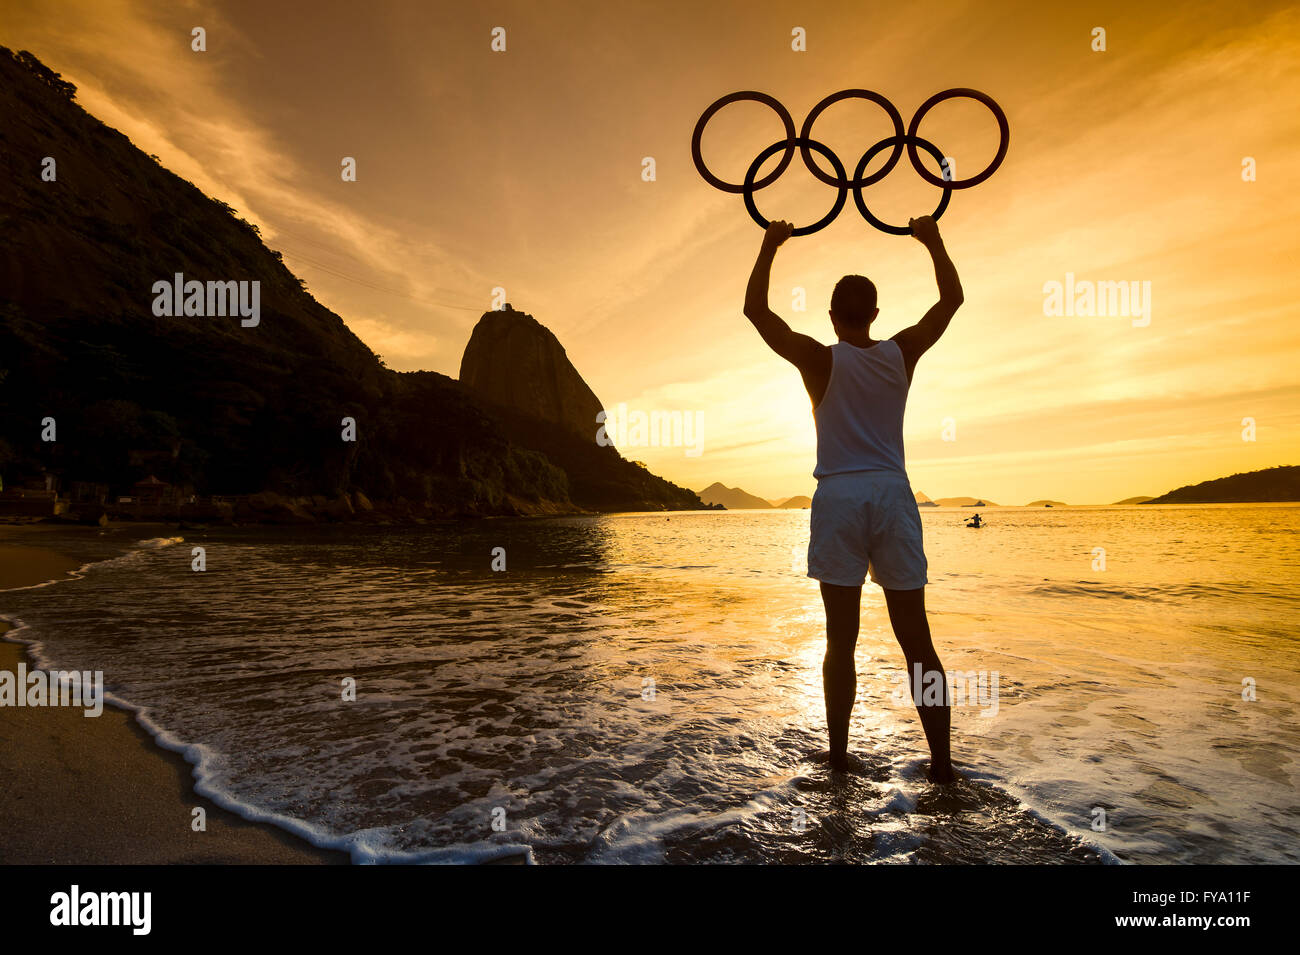 RIO DE JANEIRO - APRIL 2, 2016: Silhouette of an athlete holds Olympic rings at a sunrise scene in front of Sugarloaf Mountain. Stock Photo